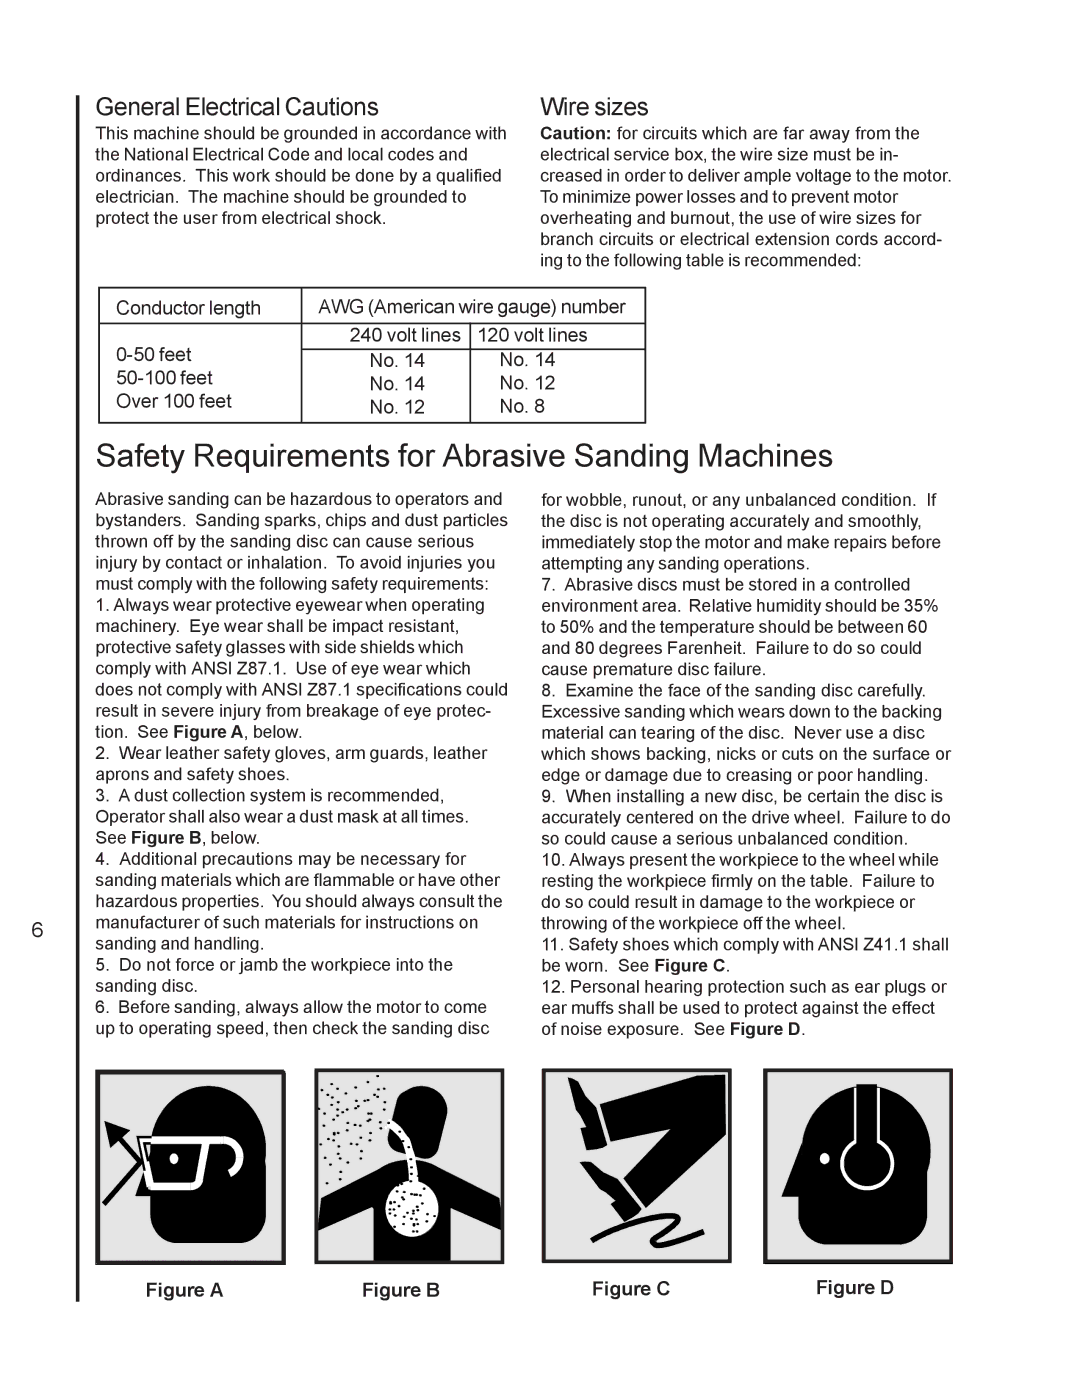 Wilton 4210 manual Safety Requirements for Abrasive Sanding Machines, General Electrical Cautions, Wire sizes 